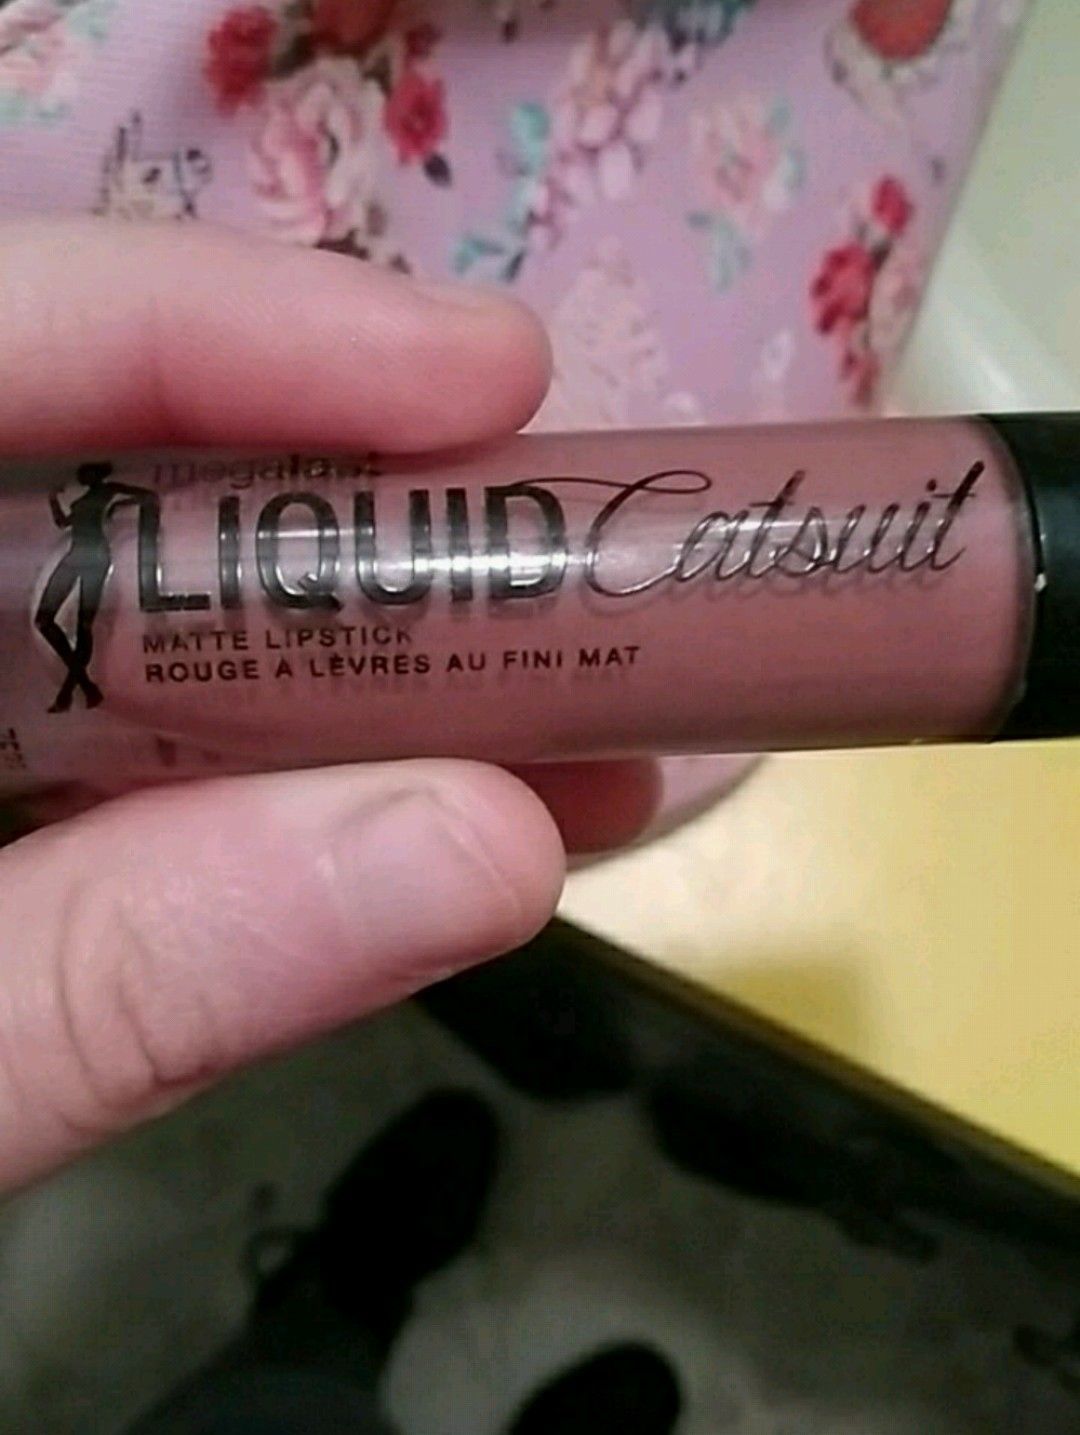 LIQUID MATTE Lipgloss and it never been used